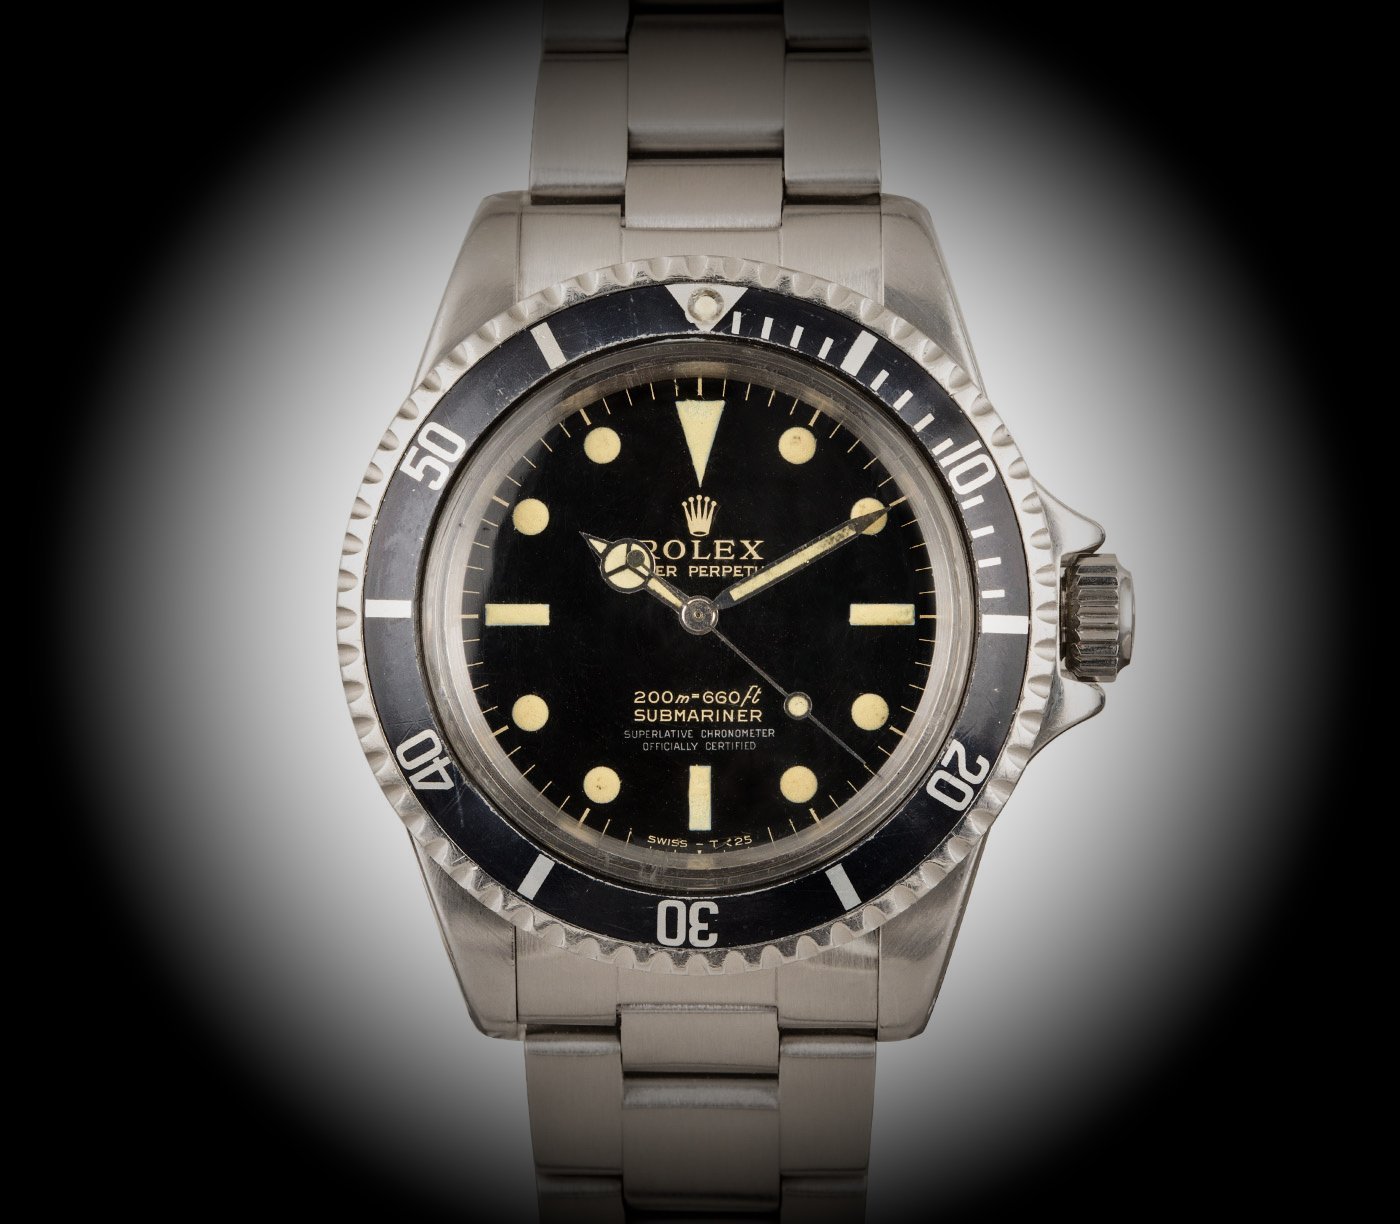 Iconic_watches_of_Hollywood_Rolex_submariner_steve_mcqueen_ref._5512-Europa_star_watch_magazine_2020